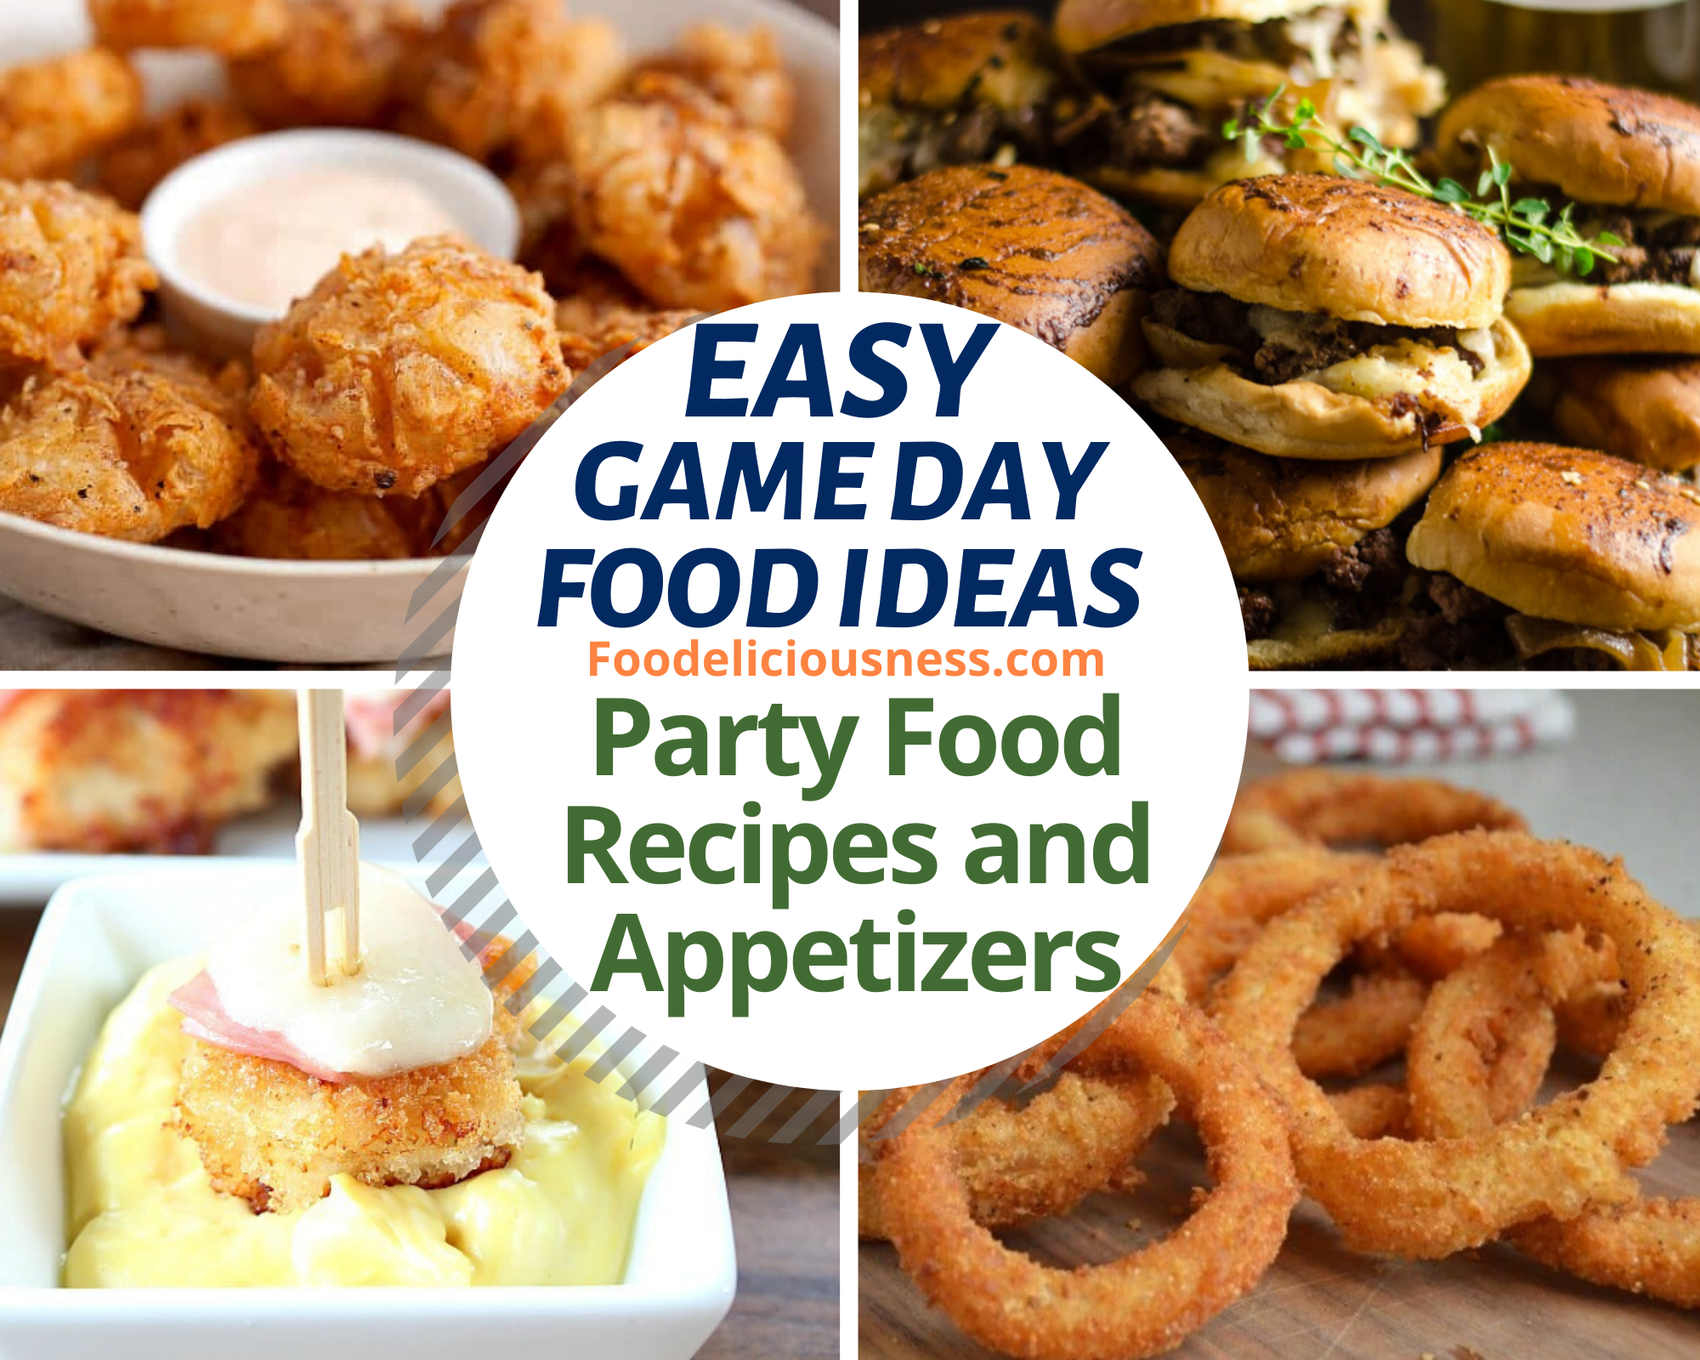 Easy Game Day Food Ideas 1 » Foodeliciousness